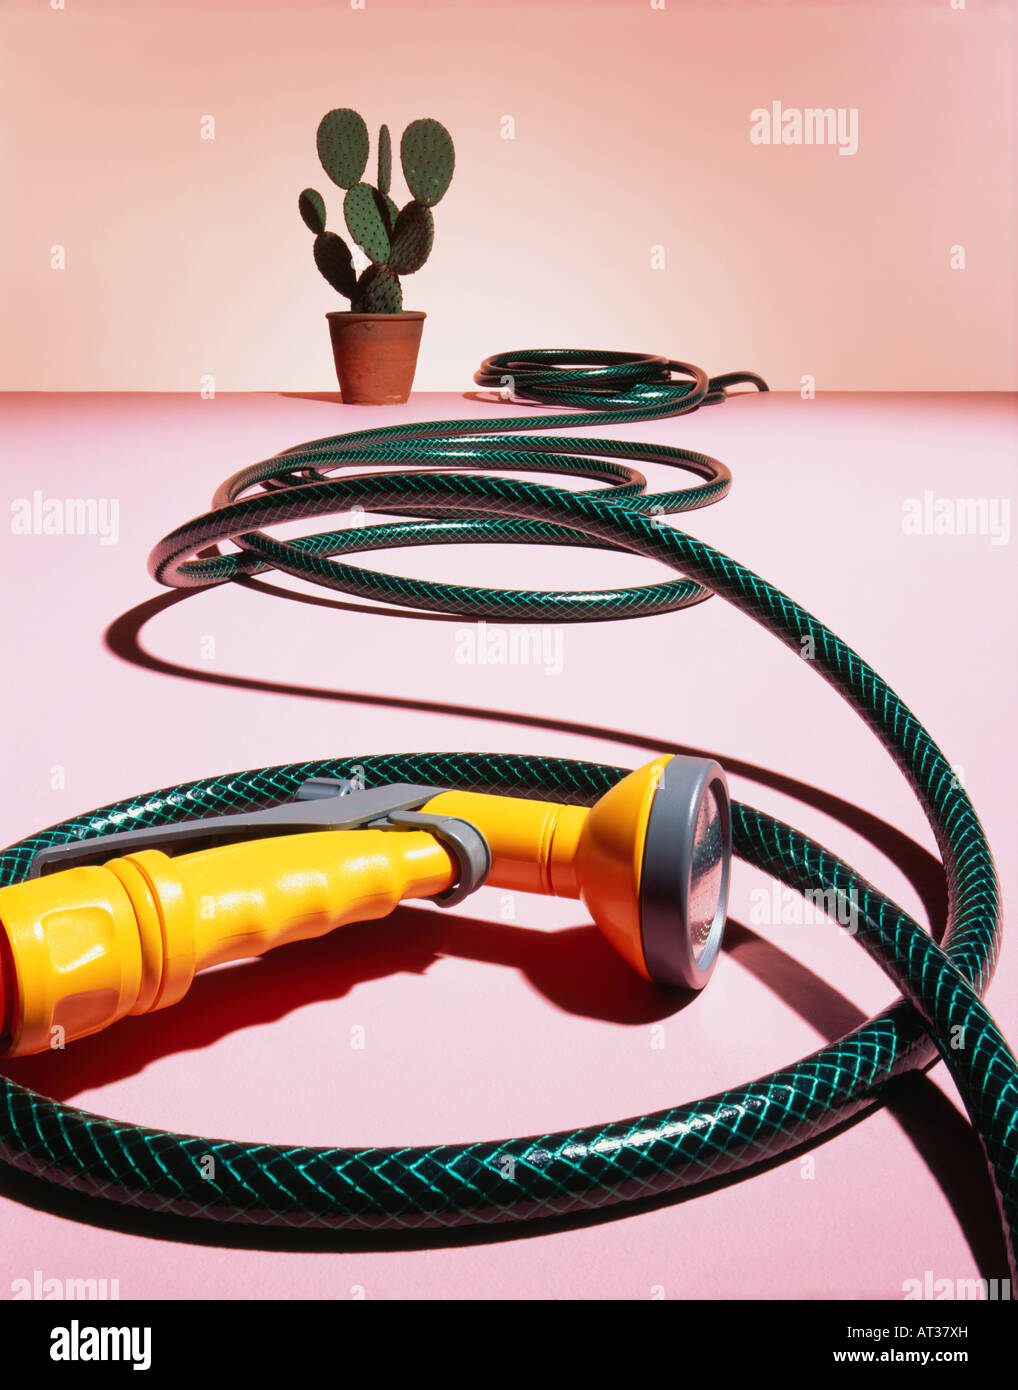 A cactus and a hose pipe Stock Photo